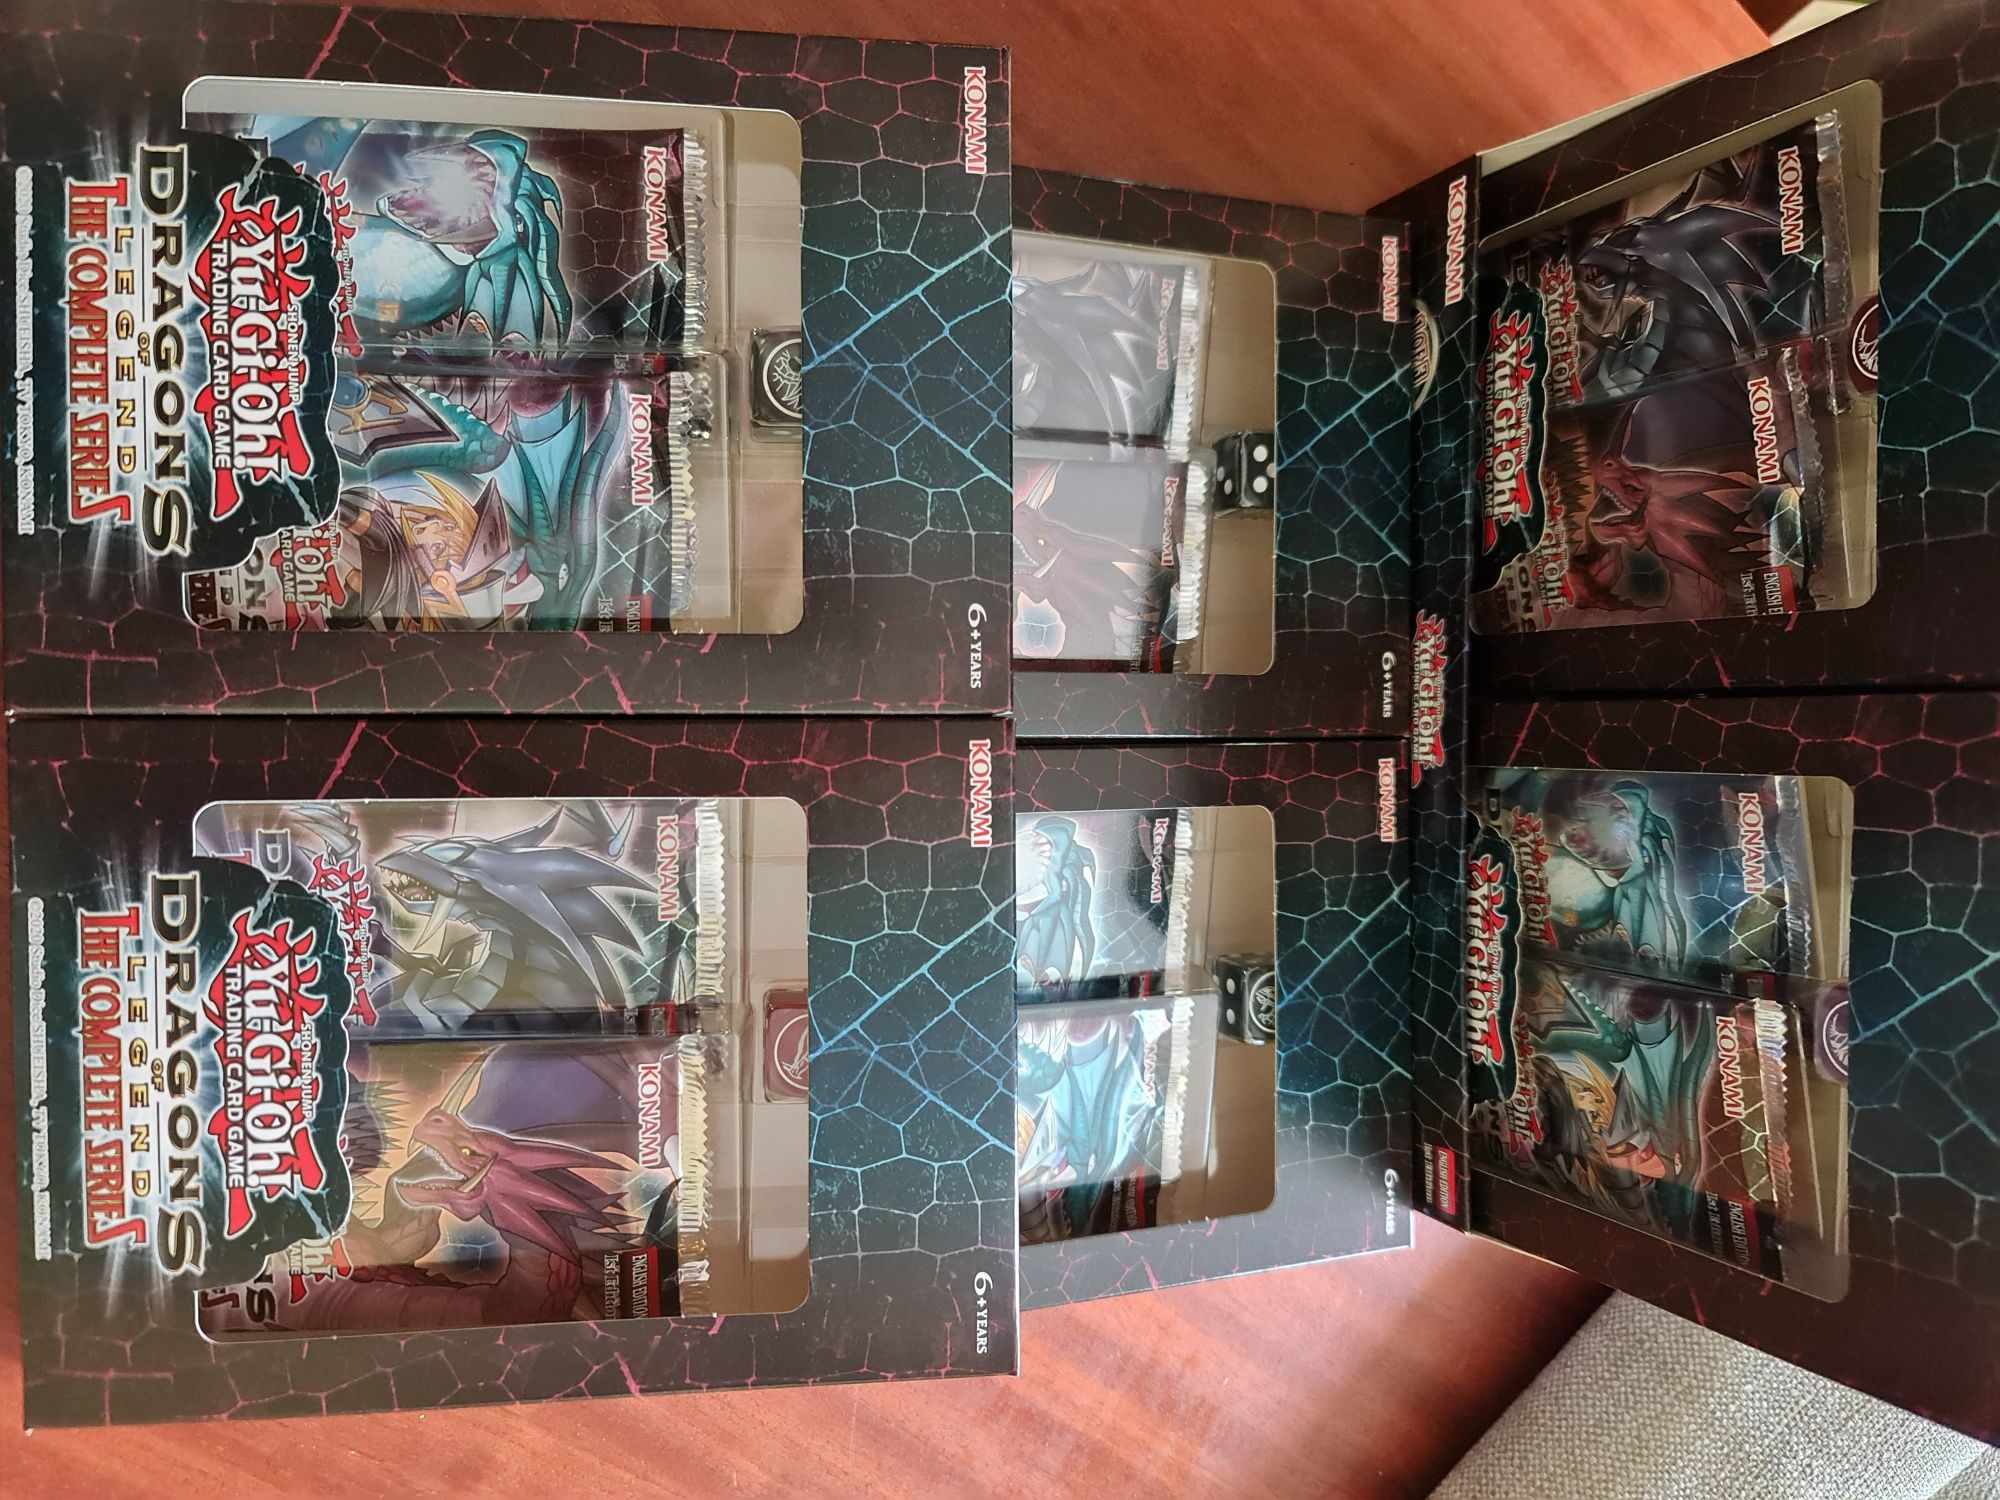 Yu-Gi-Oh !Dragons of Legend: The Complete Series